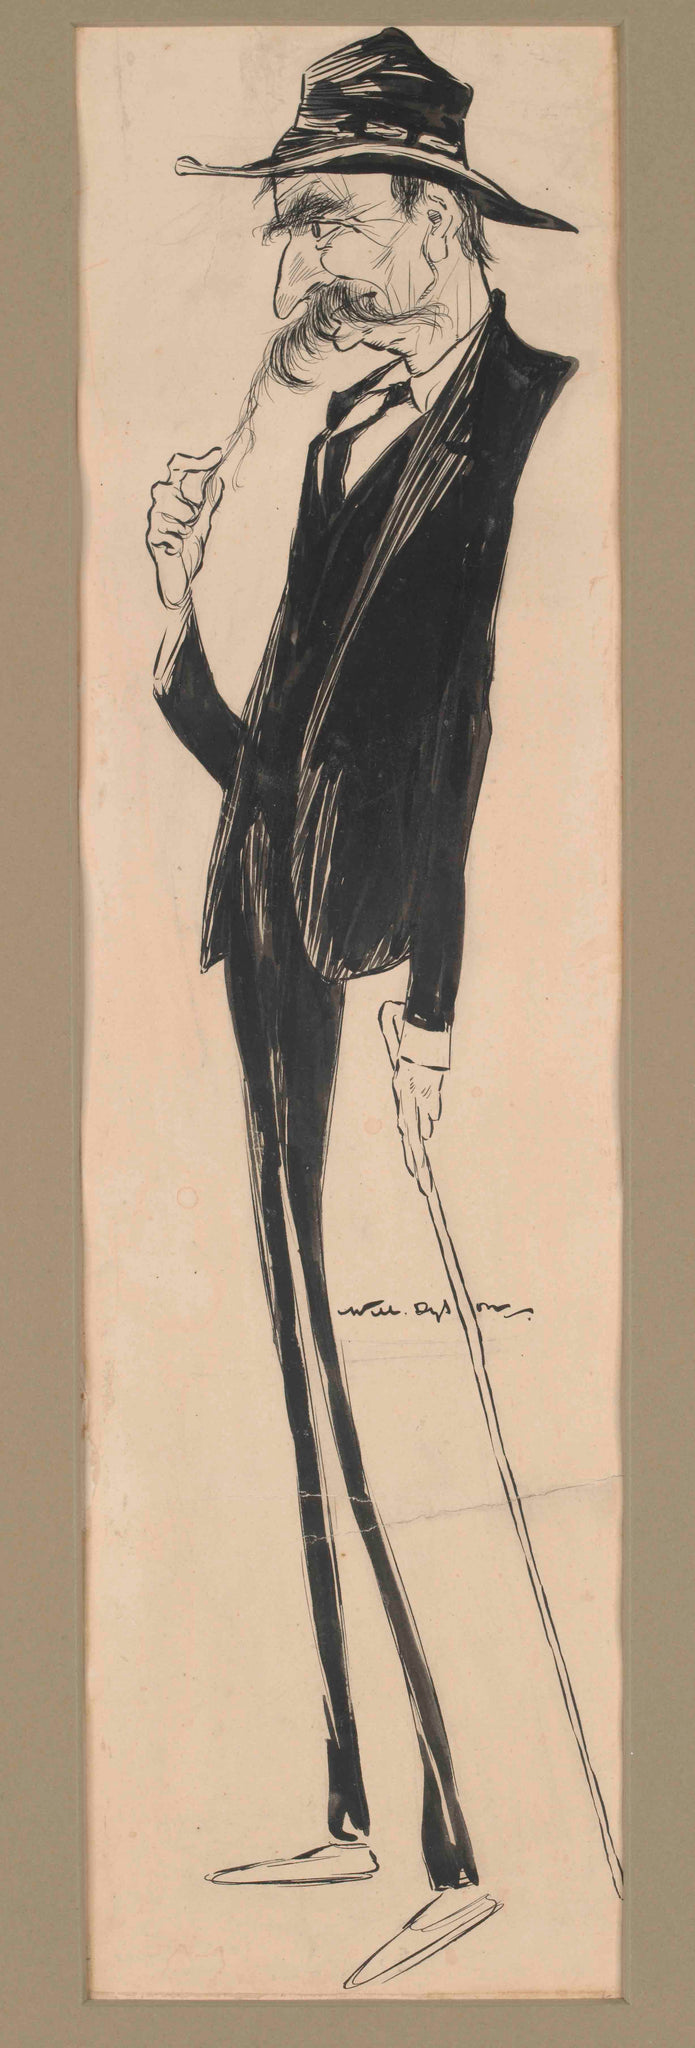 DRAWING OF HENRY LAWSON BY WILL DYSON 1908 - STATE LIBRARY VICTORIA